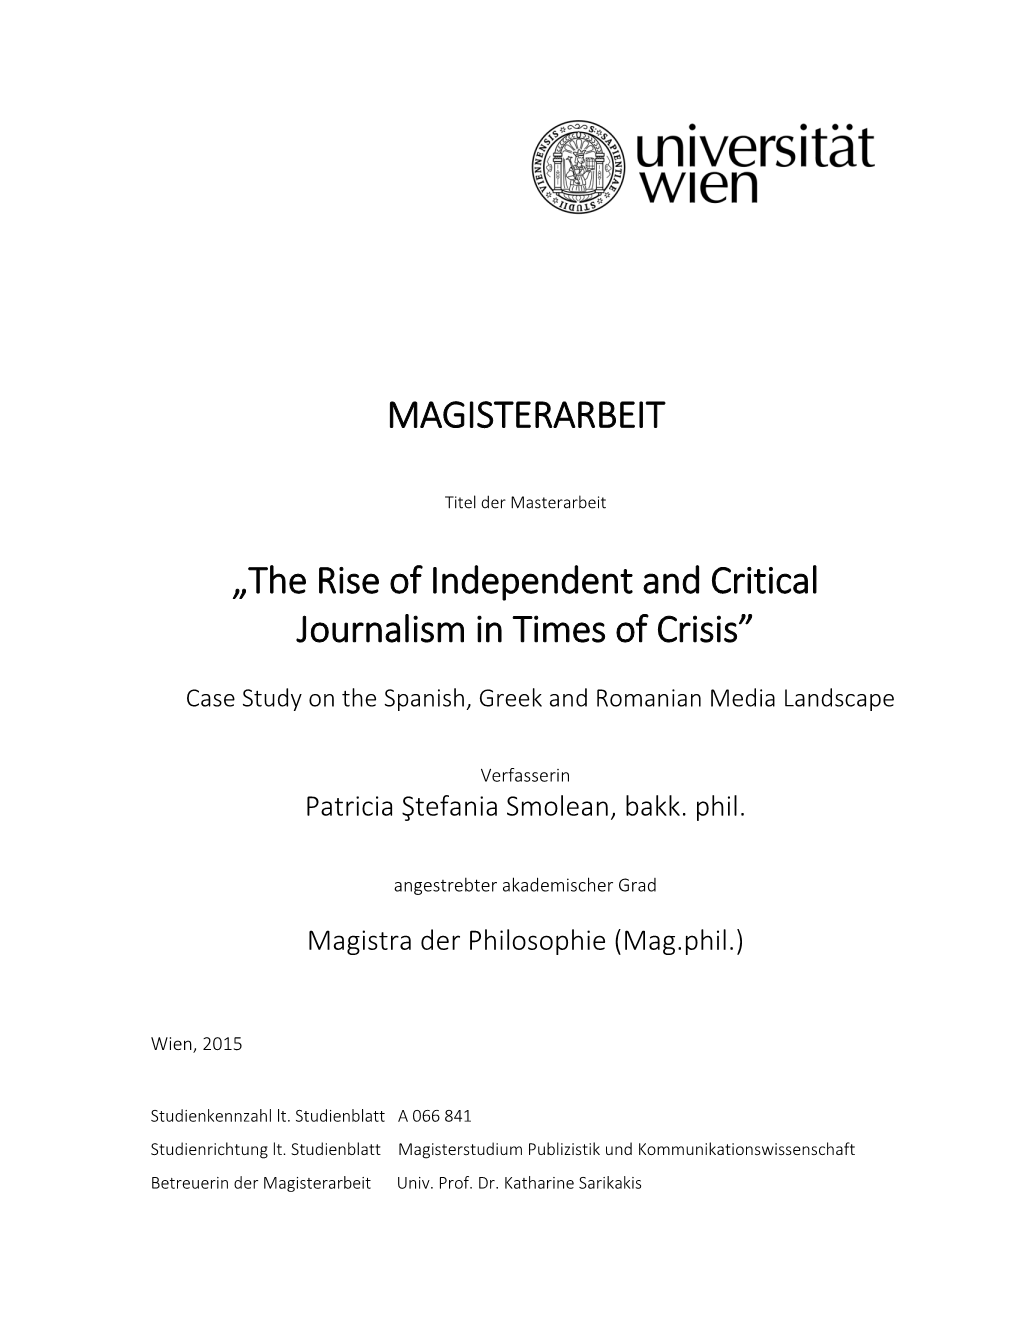 The Rise of Independent and Critical Journalism in Times of Crisis”